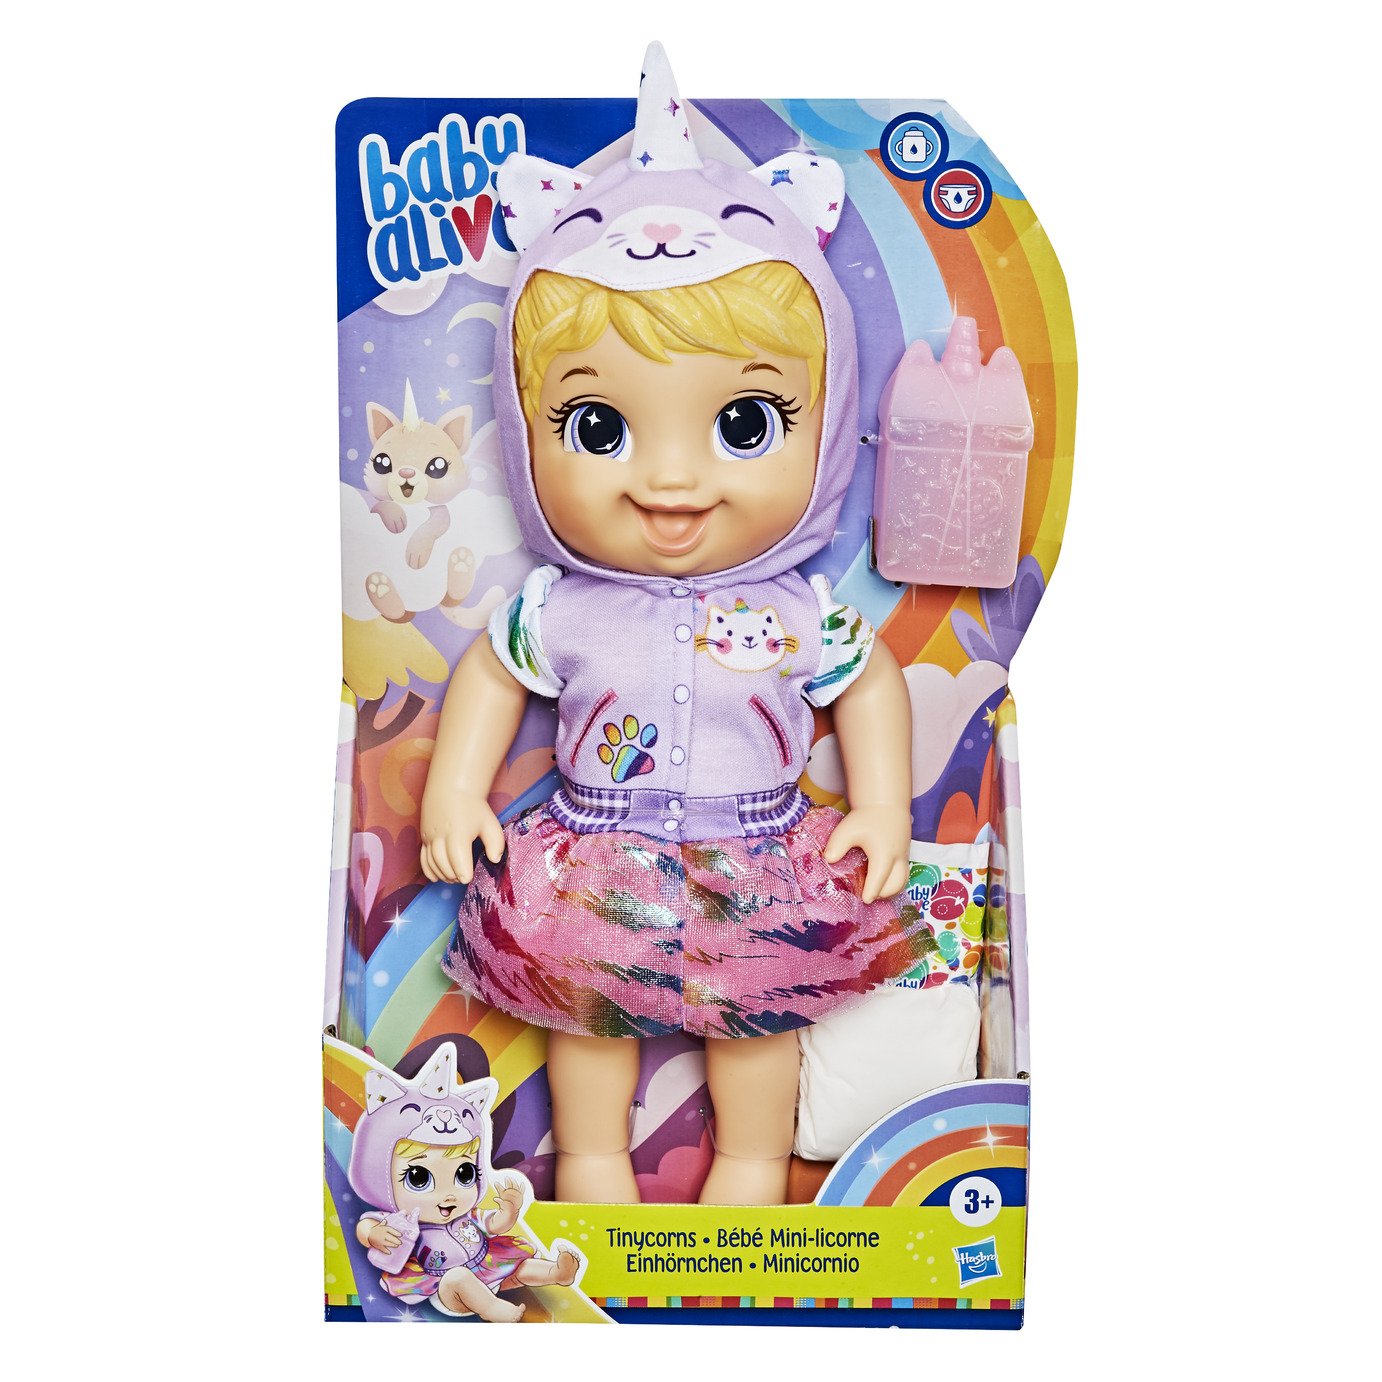 Baby Alive Tinycorns Doll Review